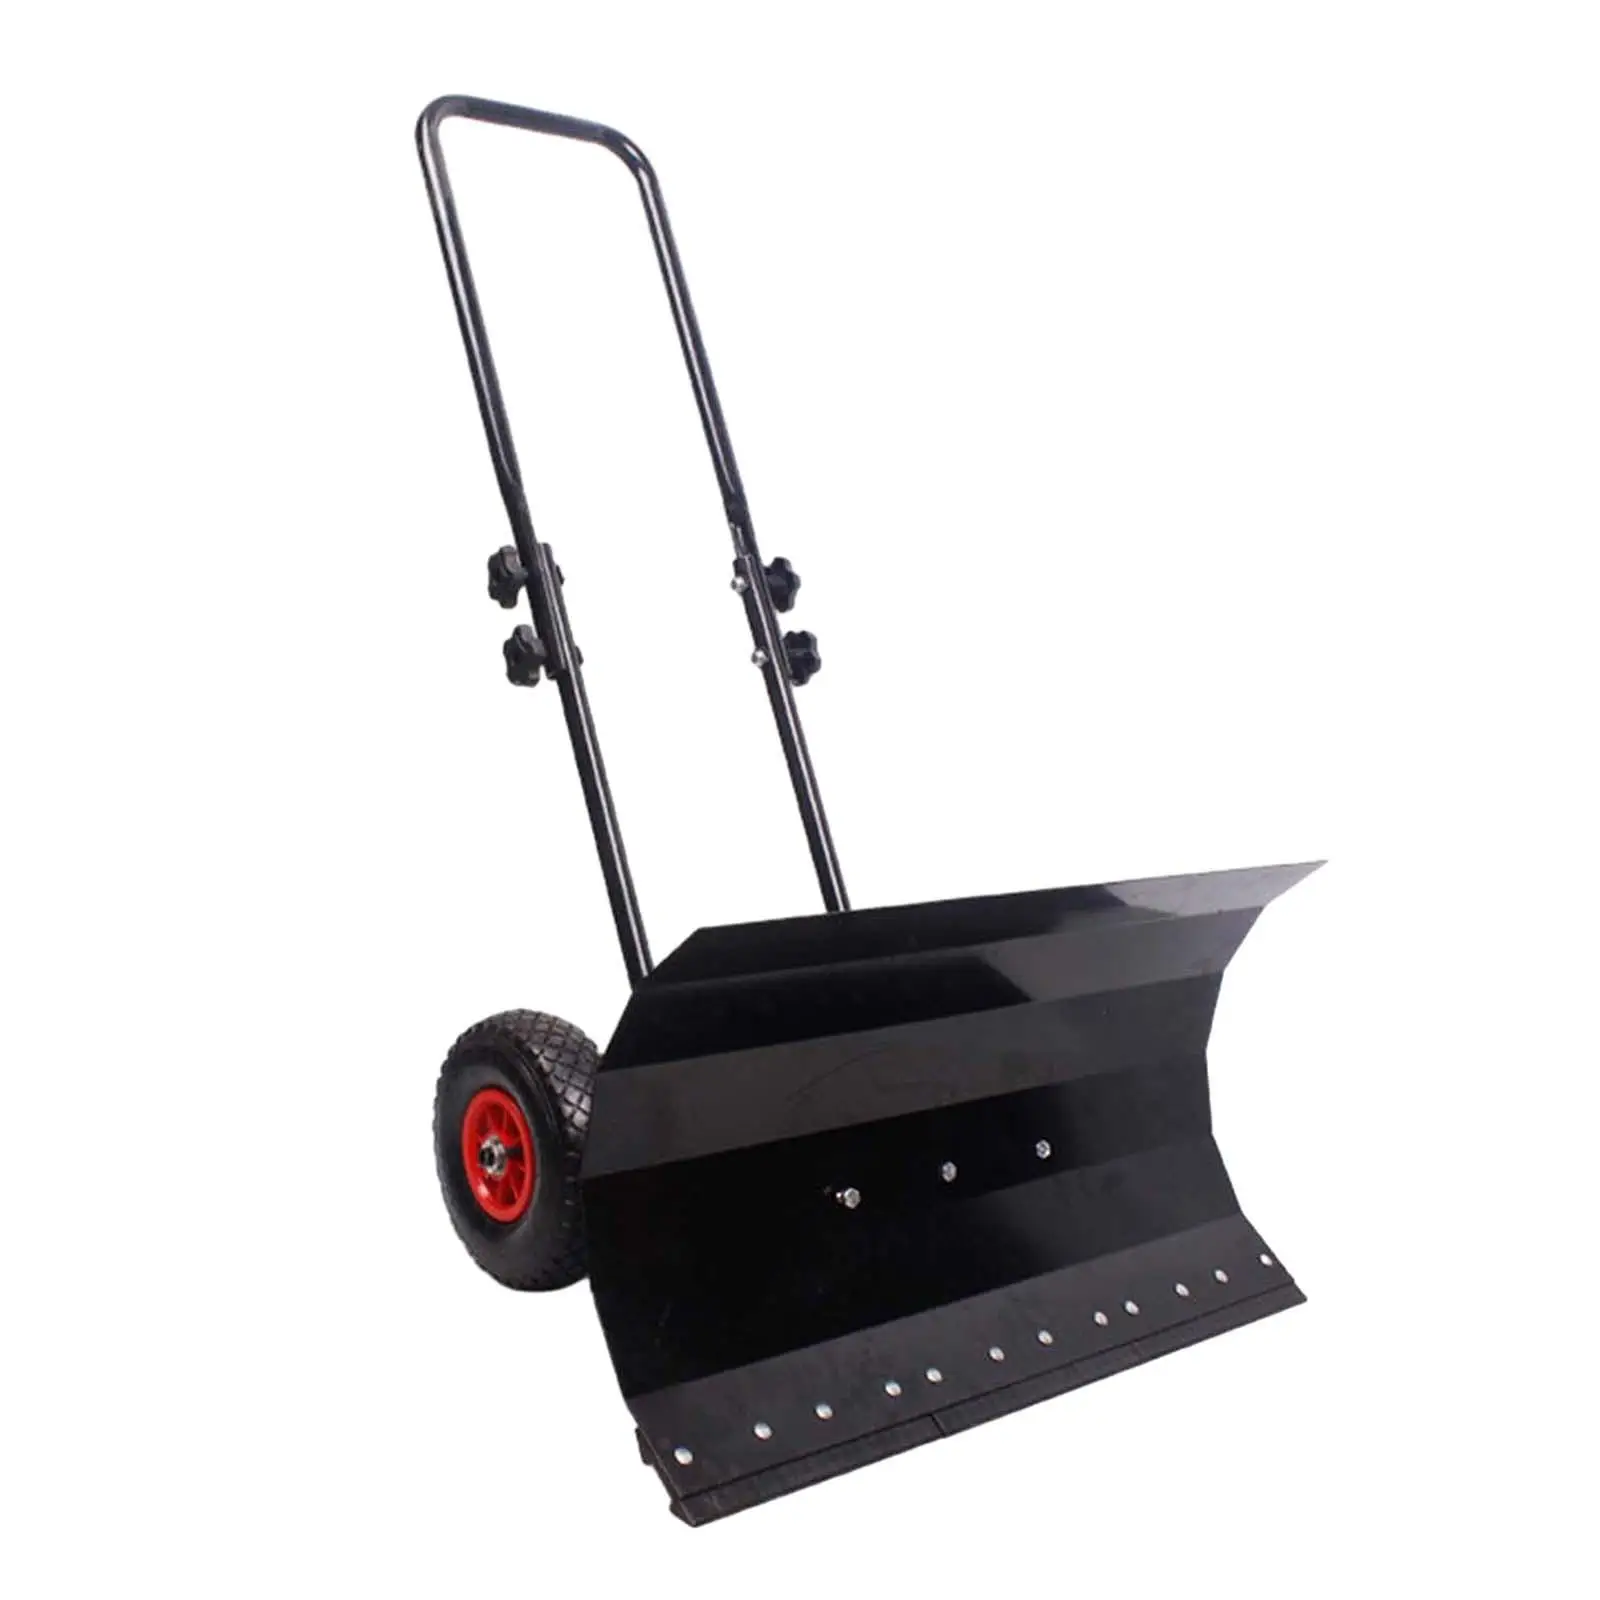 Snow Shovel Ice Scoop Road Cleaning Tool Portable Rolling Pusher Snow Pusher for Sidewalk Winter Doorway Yard Pavement Clearing